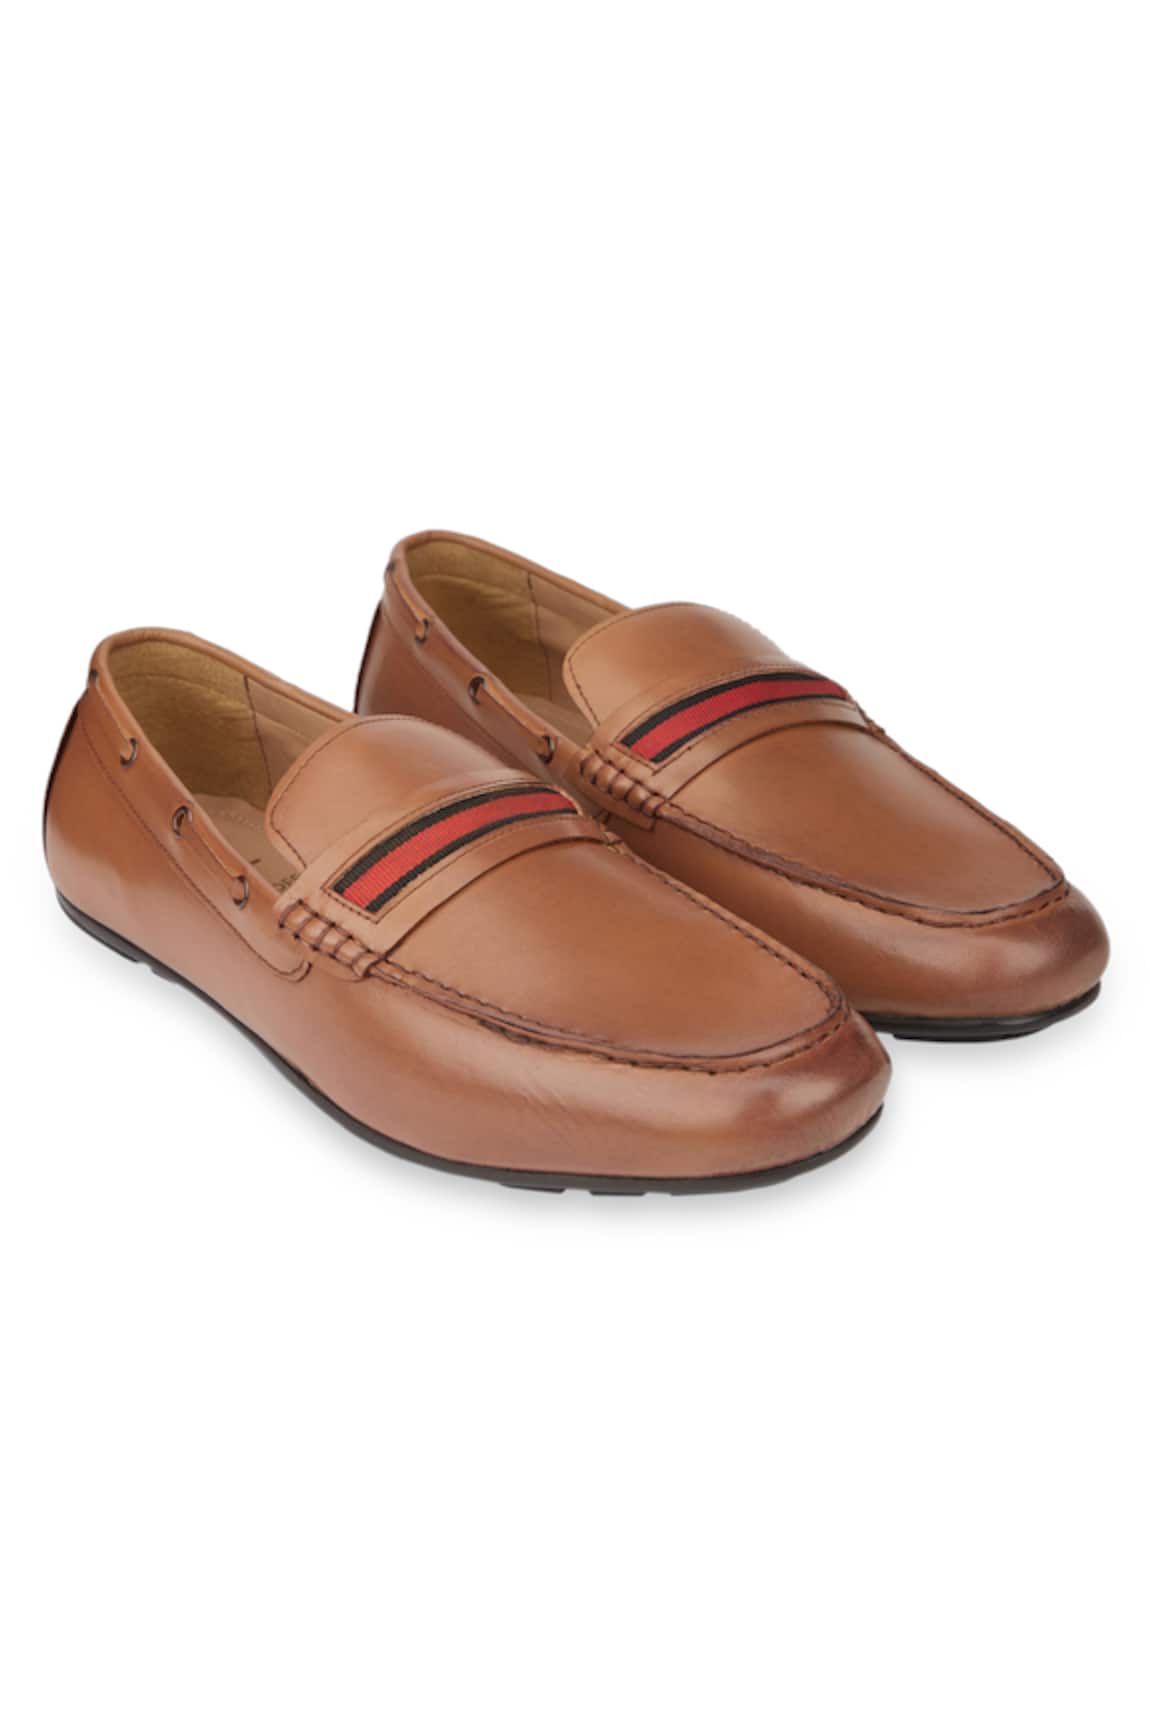 Hats Off Accessories Leather Loafer Shoes